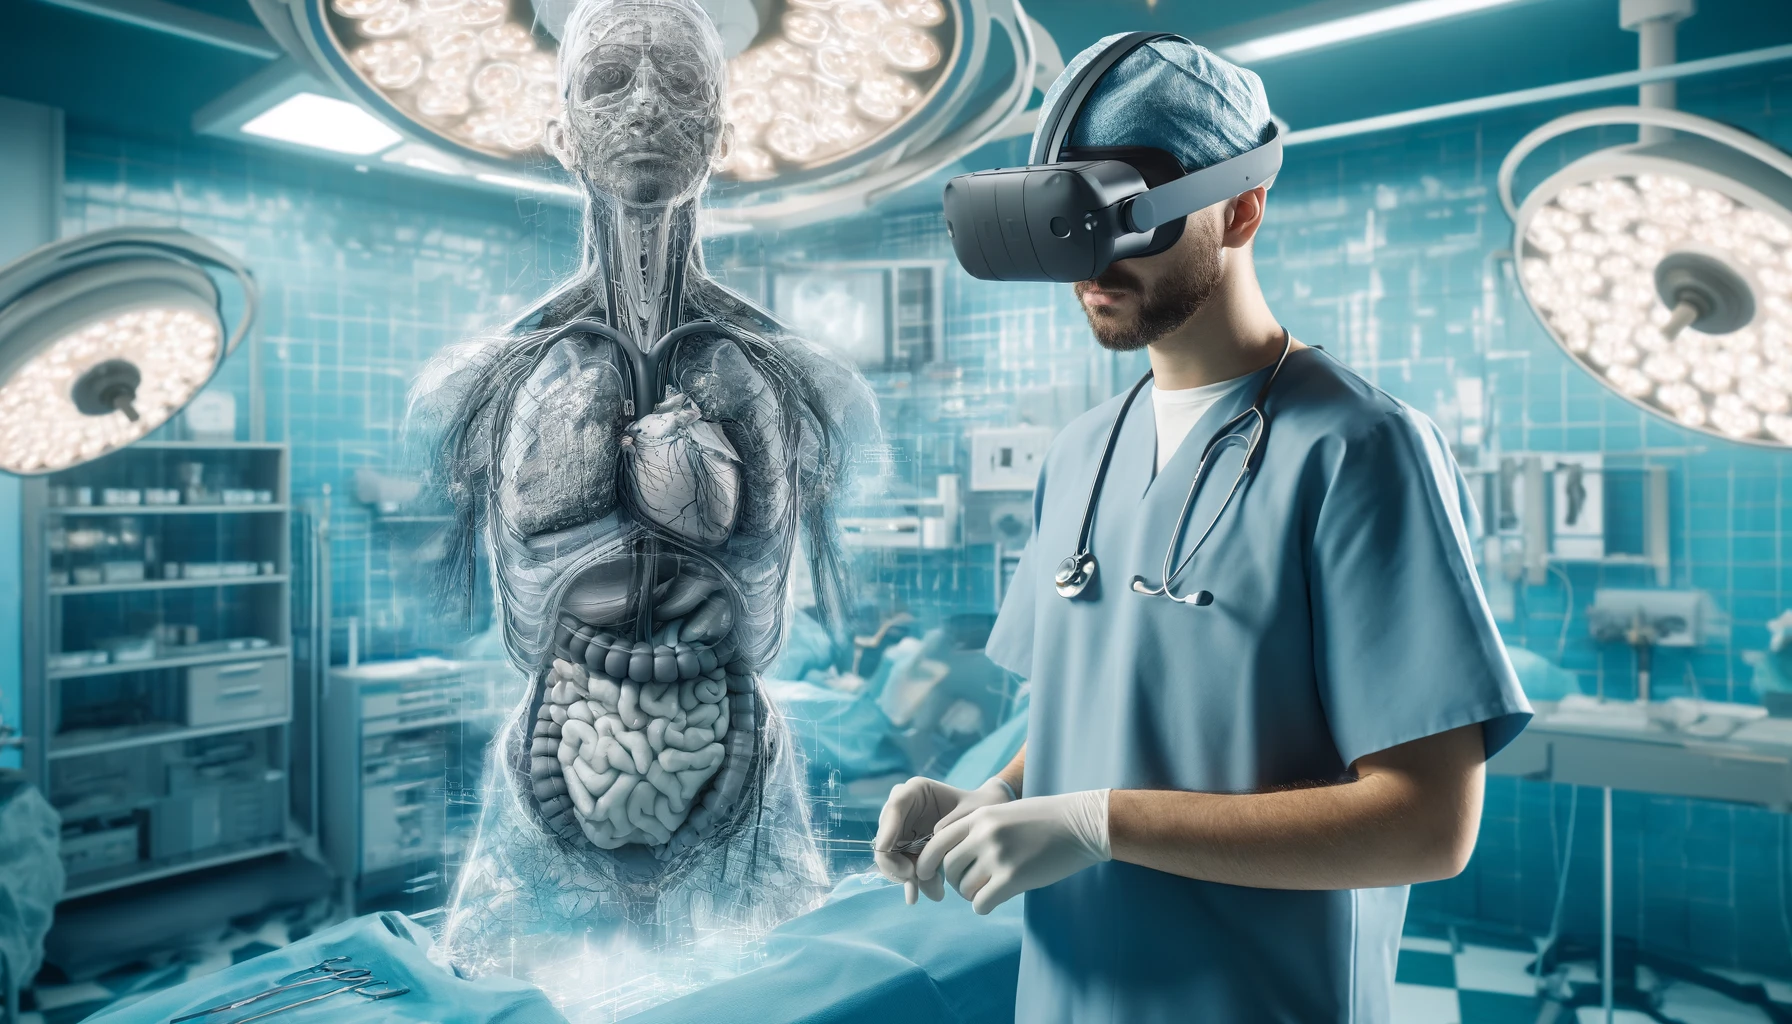 A surgeon using virtual reality equipment to simulate a surgical procedure. The image shows the surgeon in an operating room, using a VR viewer showing detailed anatomical structures and surgical tools.